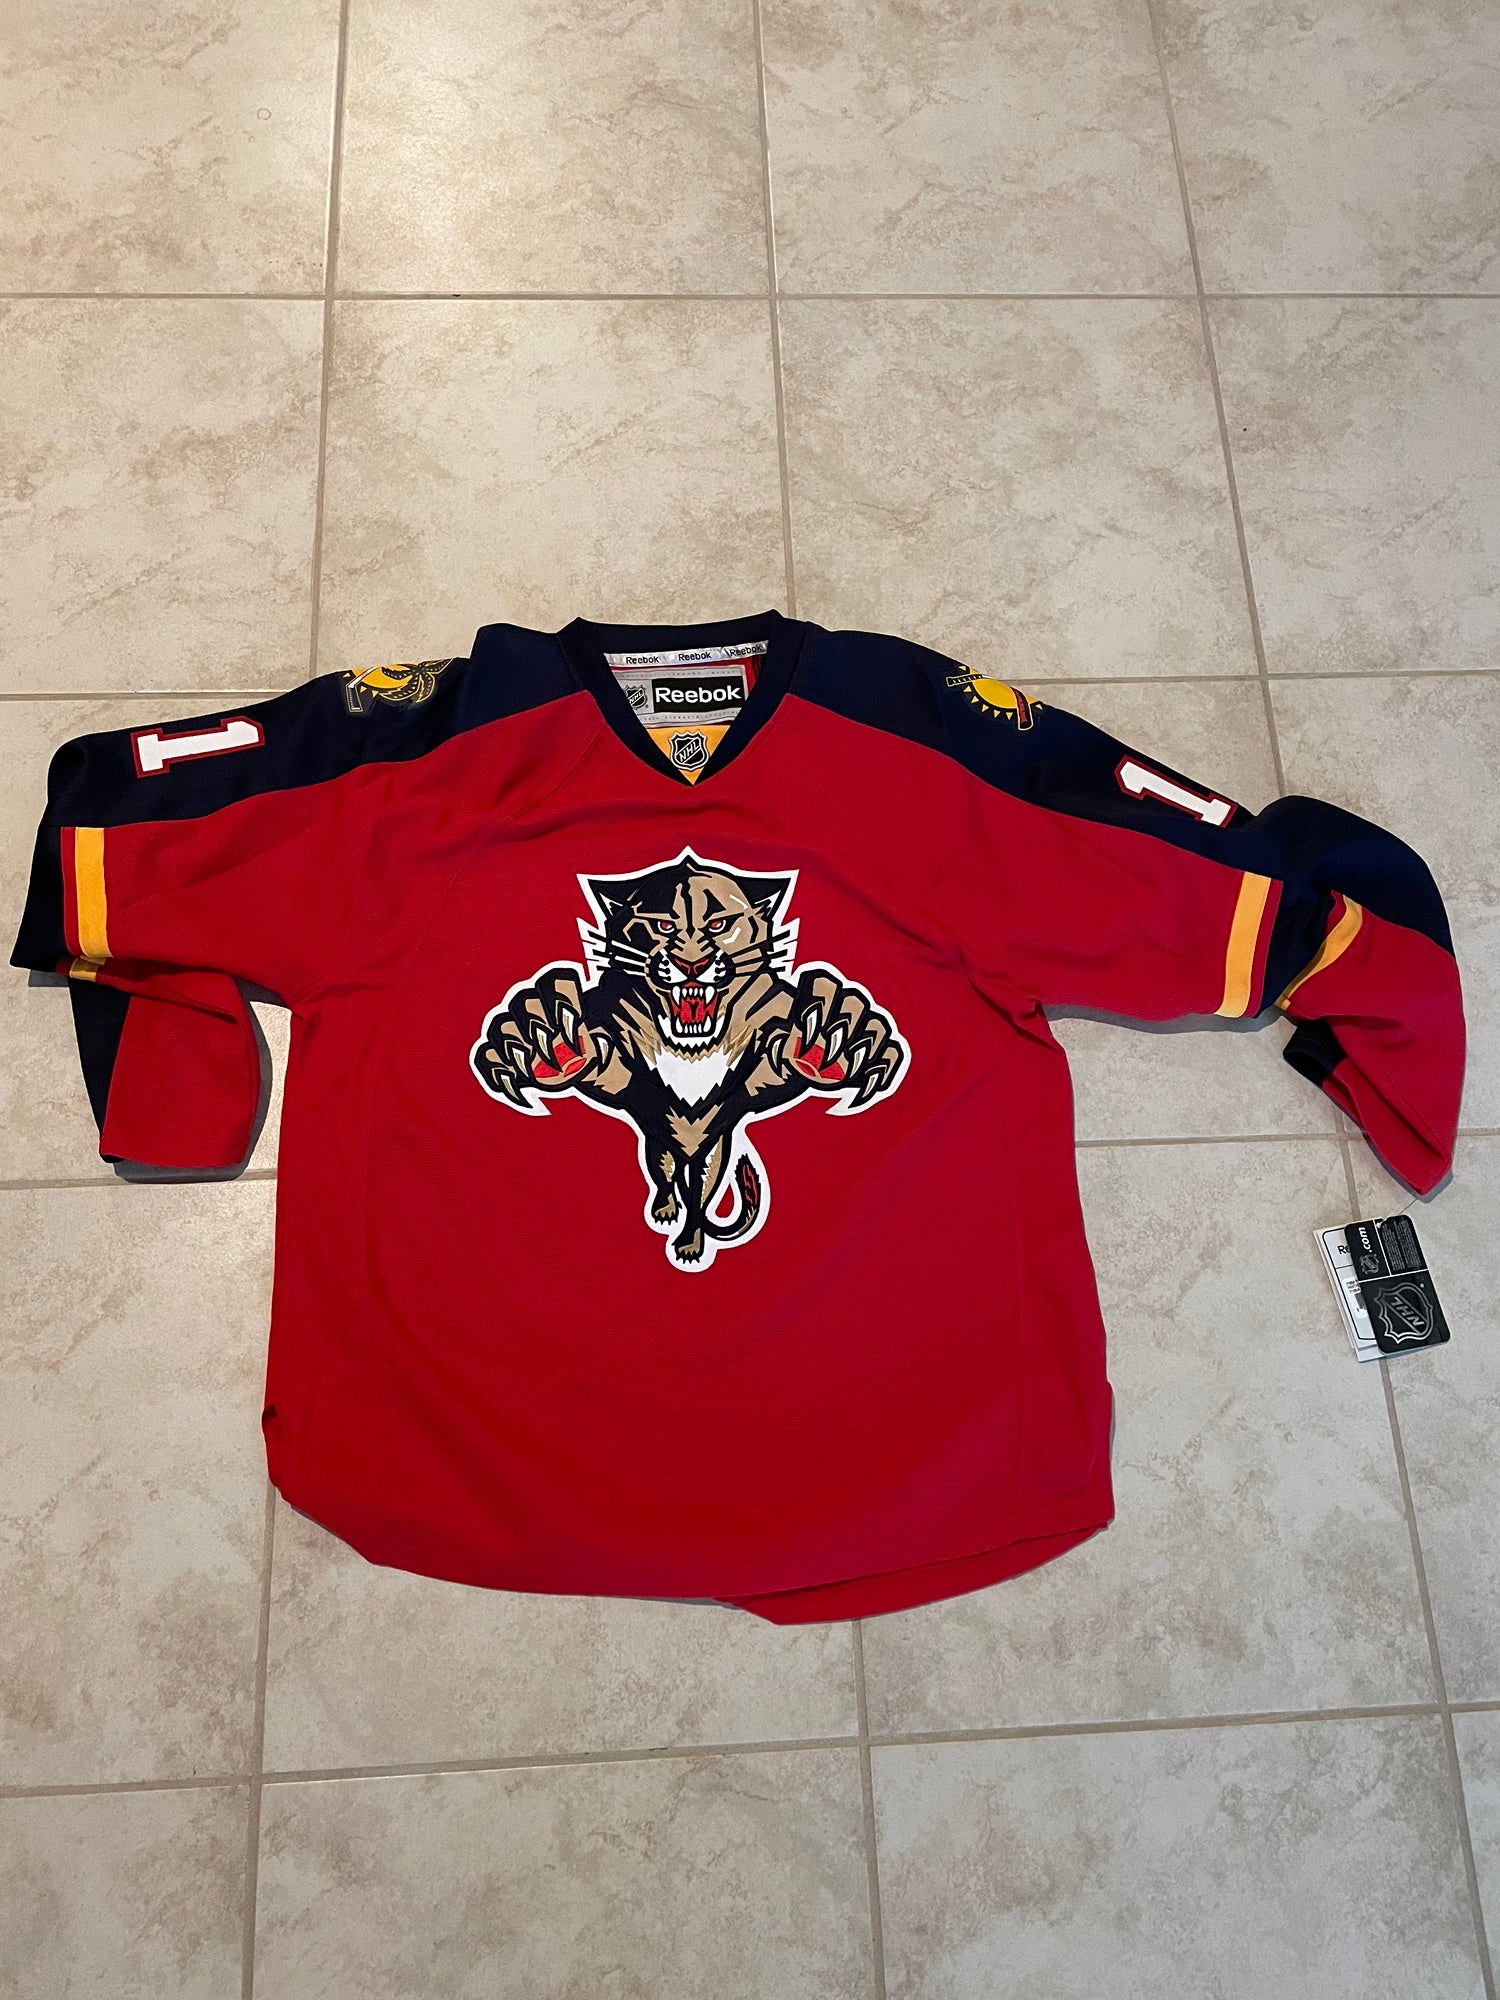 It's a 'JetBlue' Reverse Retro for the Florida Panthers